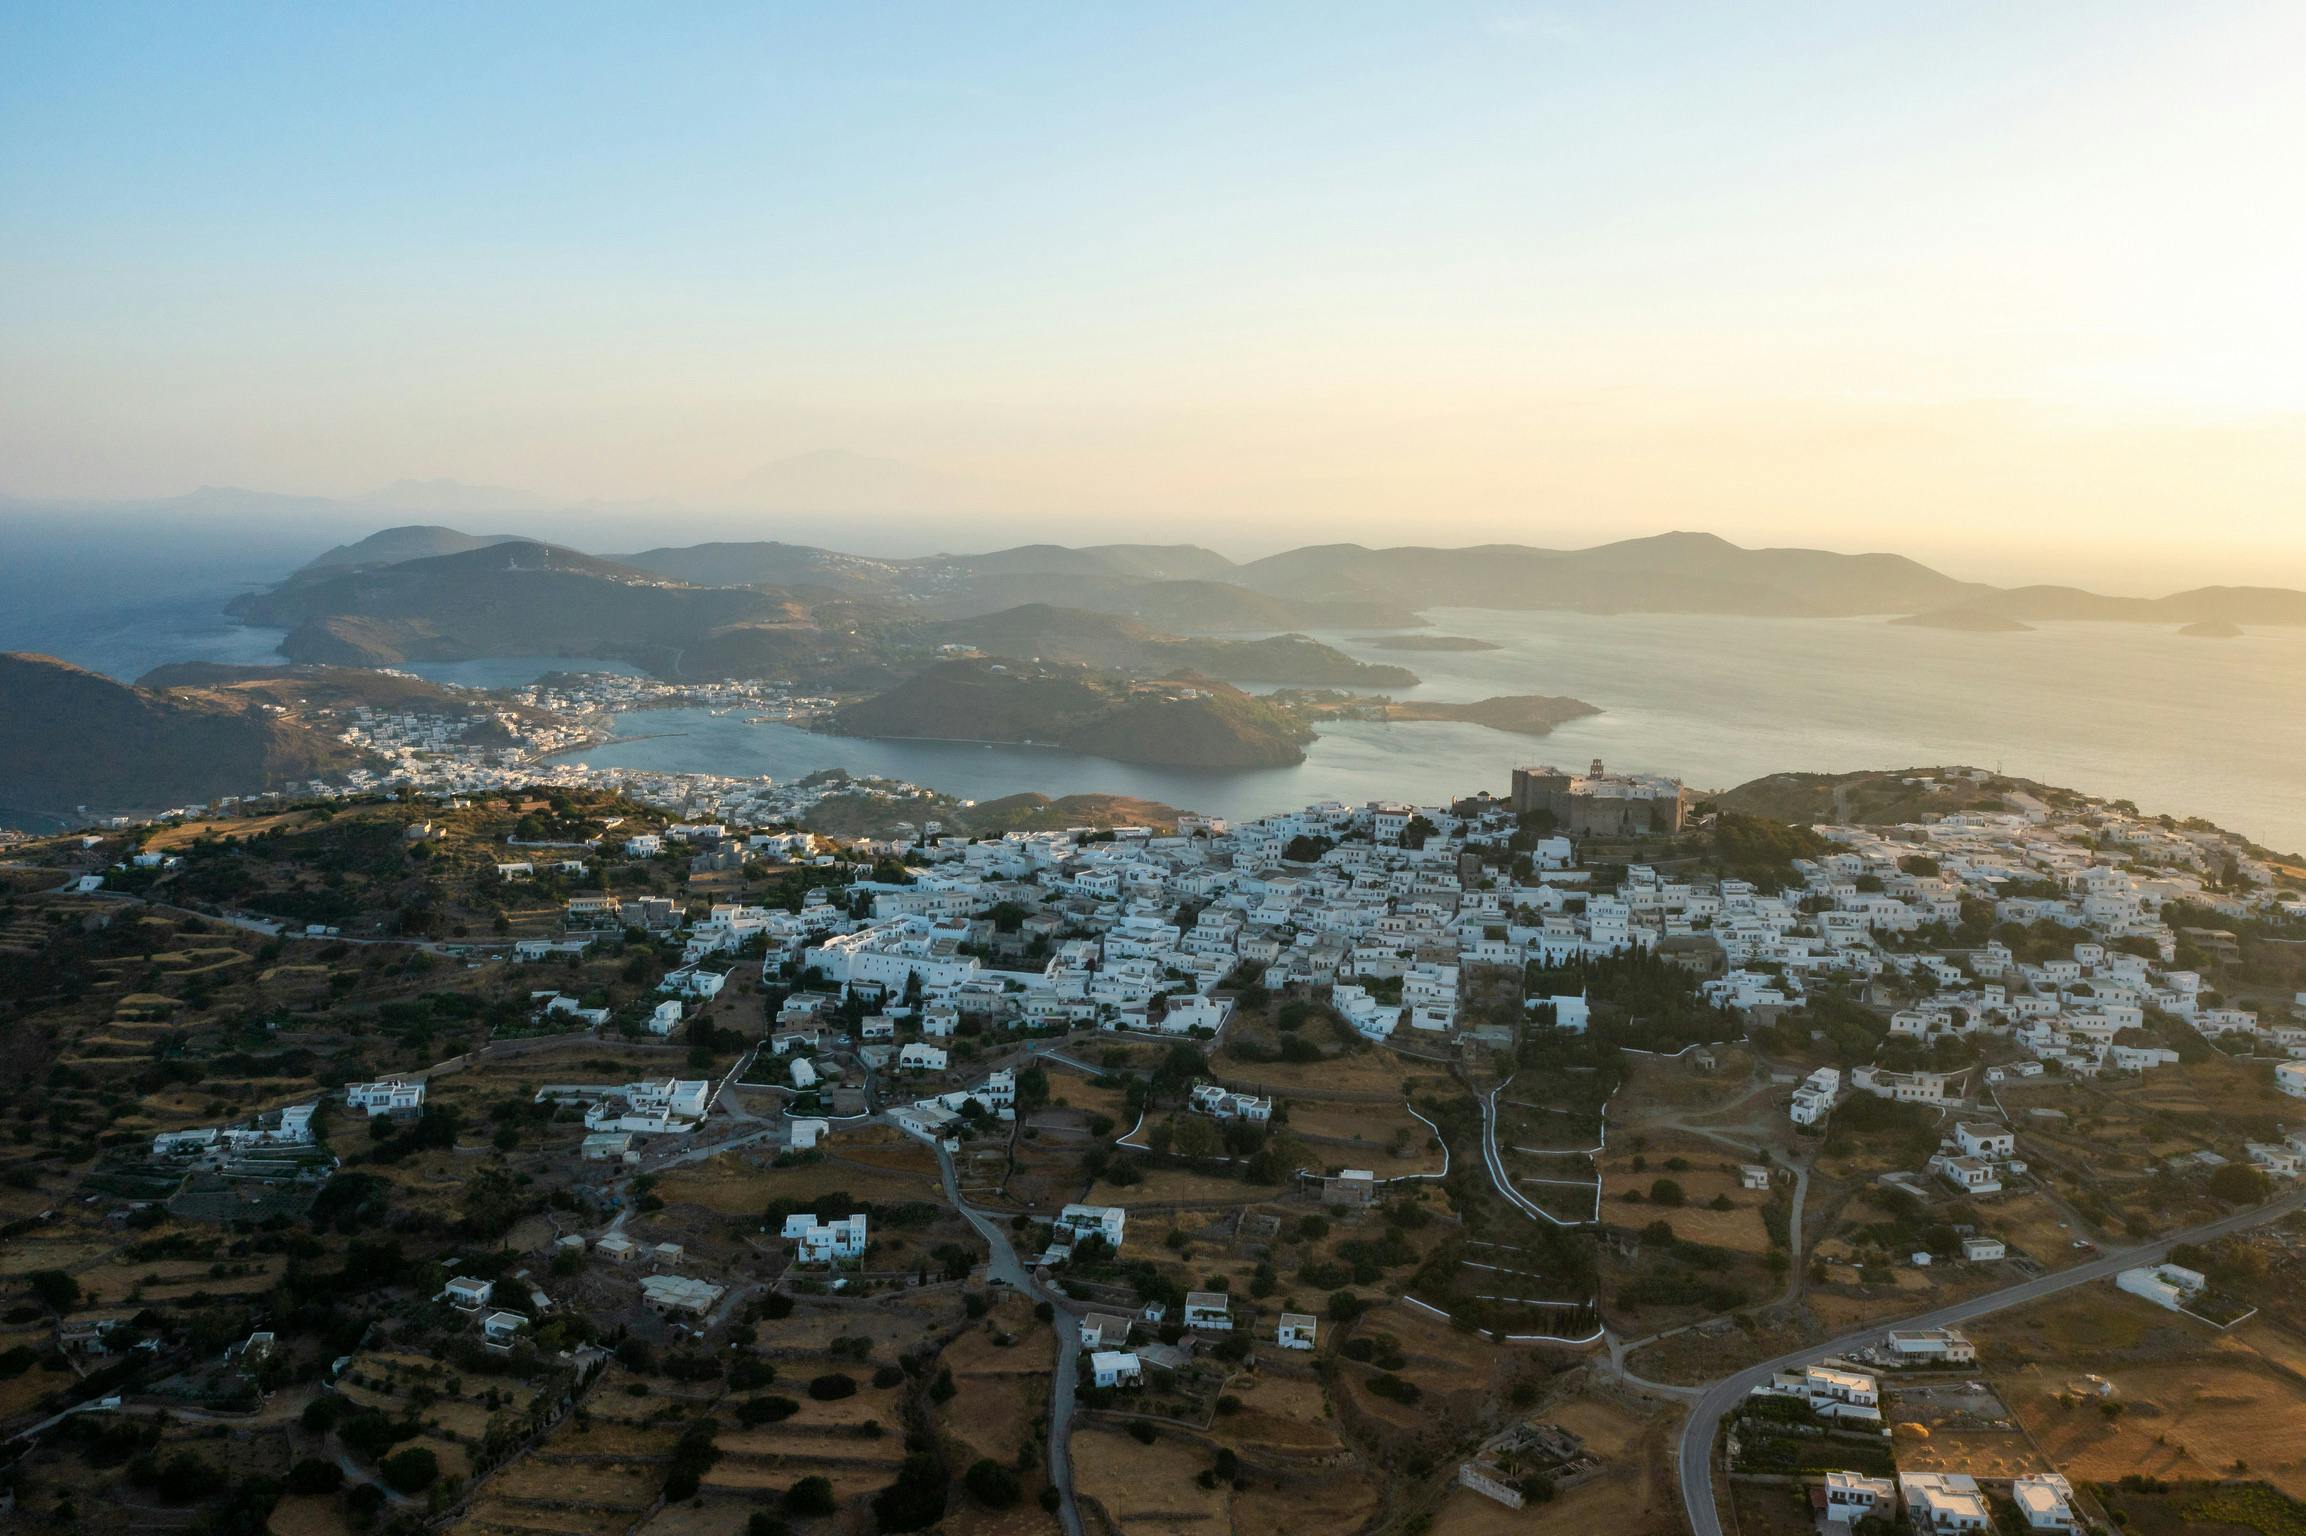 John: The Beloved and Patmos